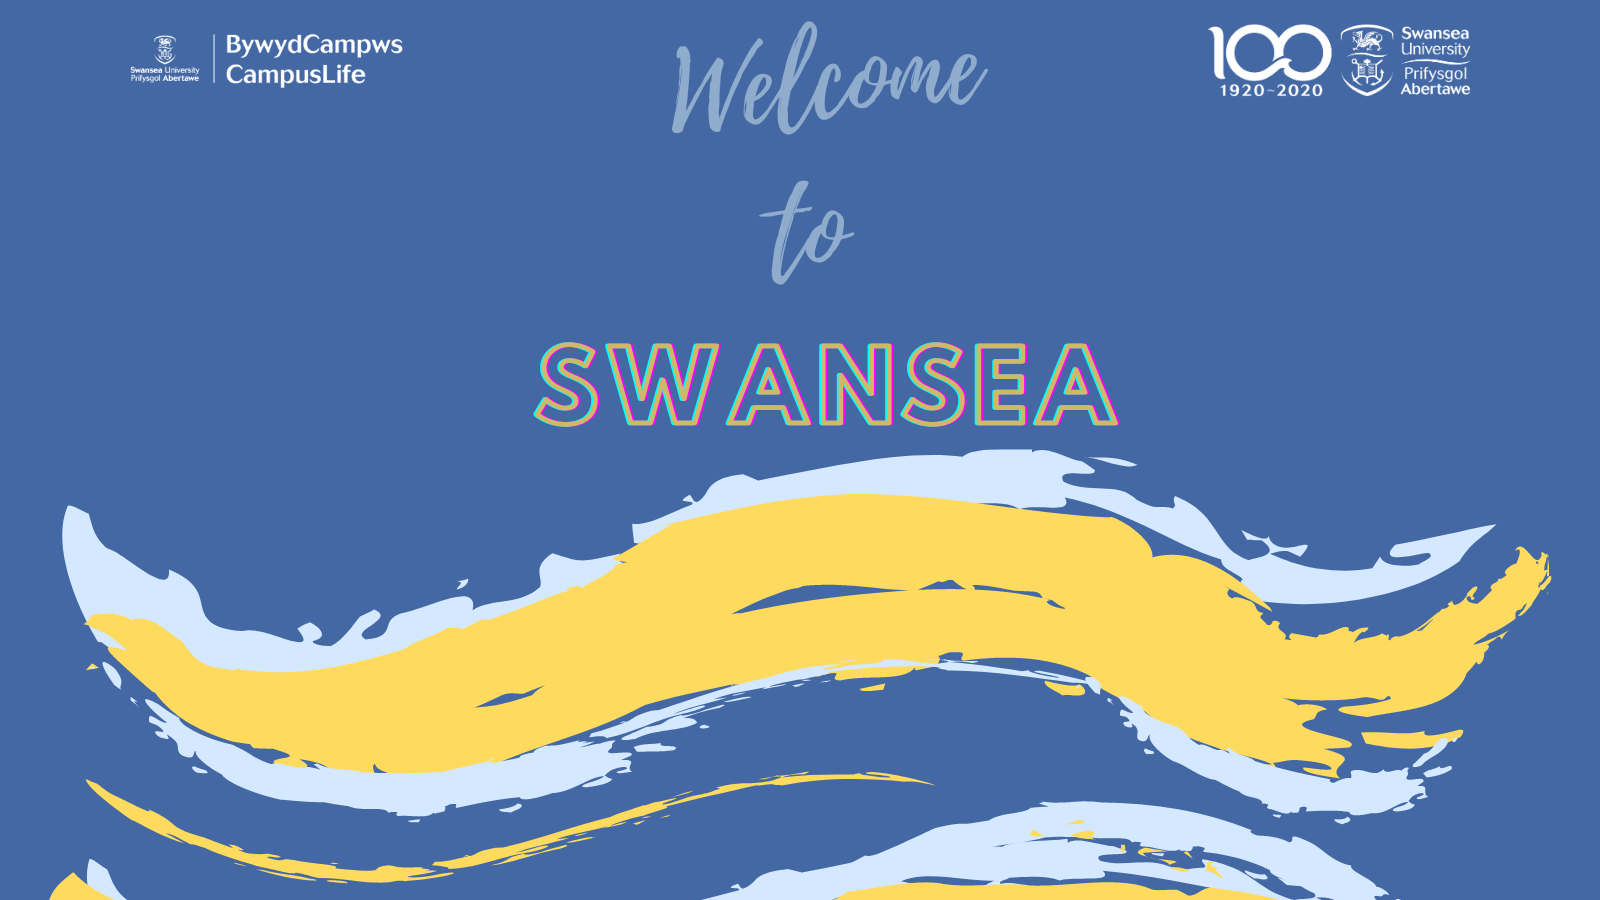 Welcome To Swansea Welsh Language Taster At Swansea University Swansea On 7th Oct 2020 Fatsoma